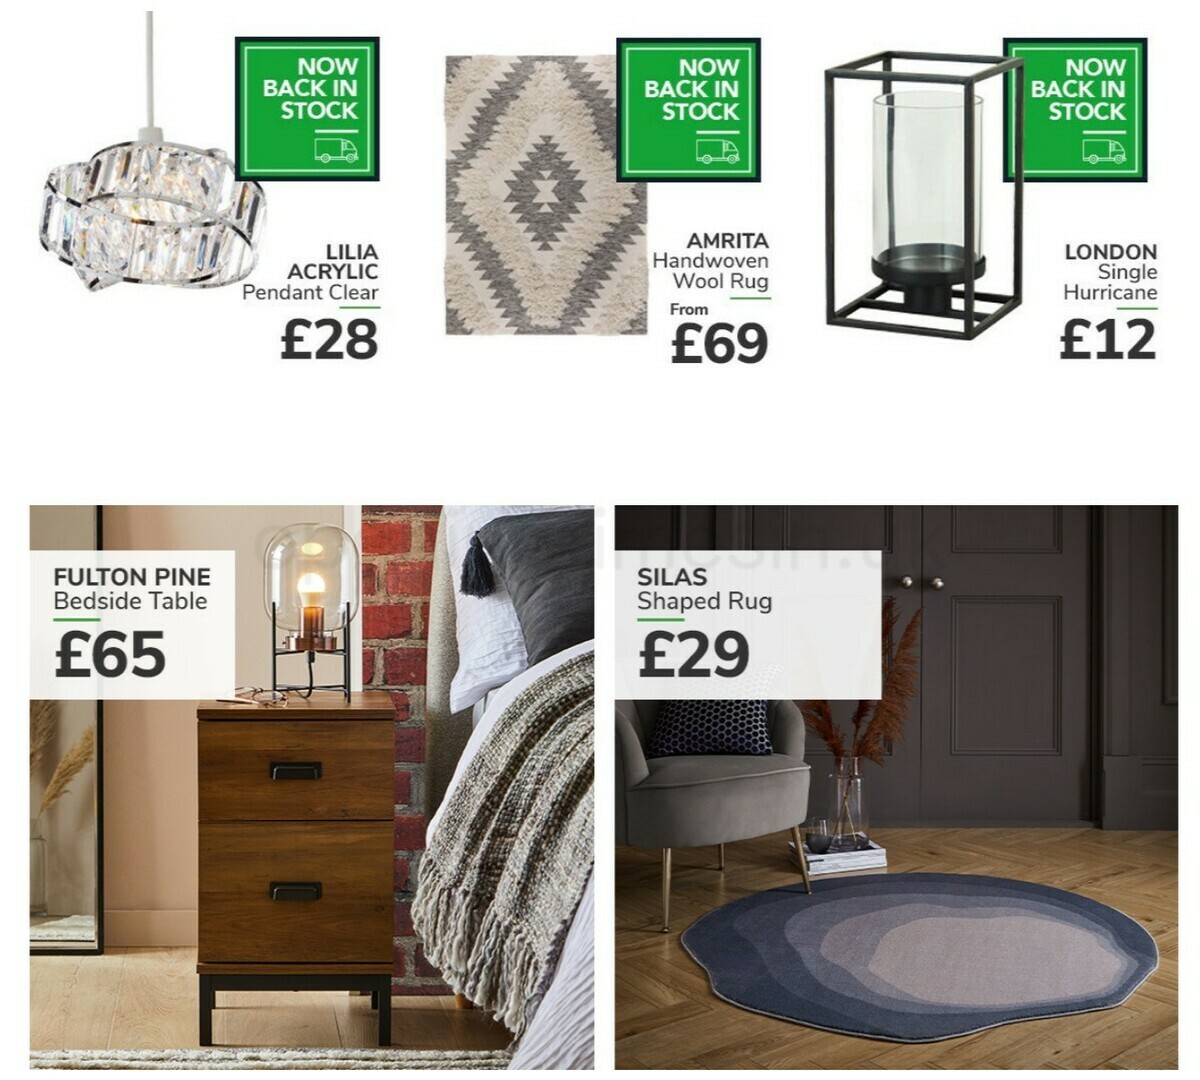 Dunelm Offers from 25 April